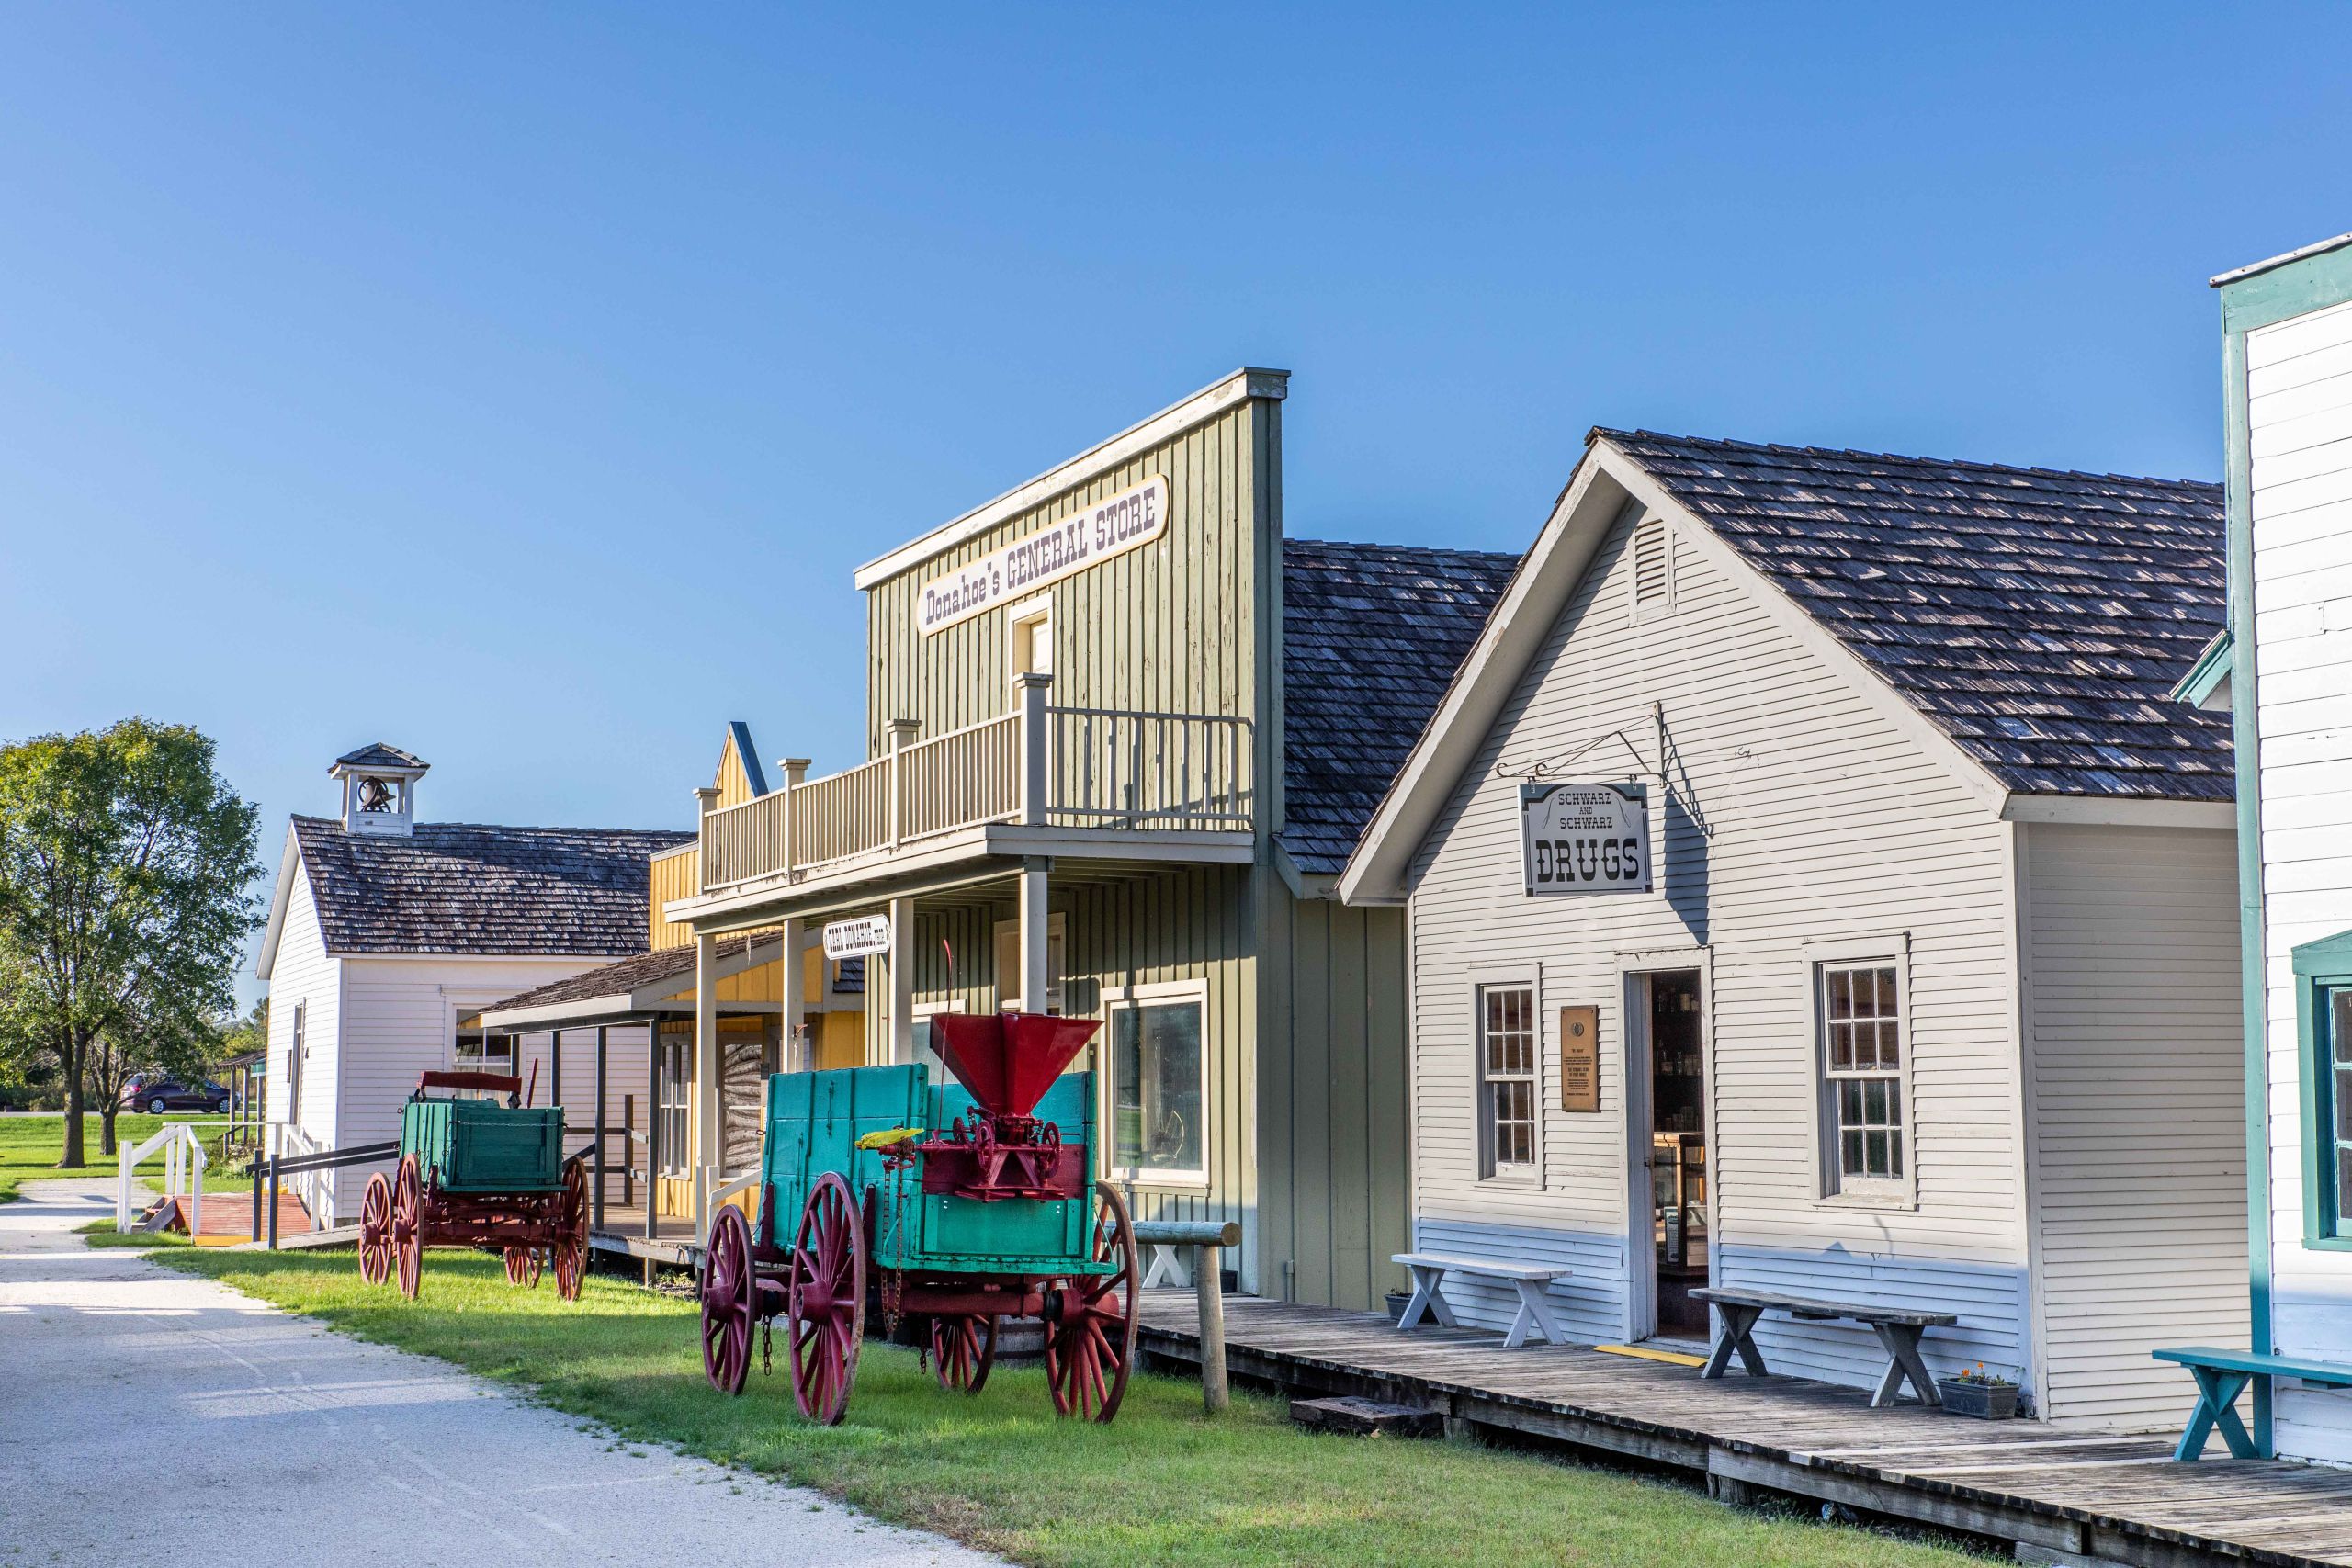 Several old-timey buildings are lit by morning sun with a blue sky and clean gravel road in the foreground. Fort Museum.